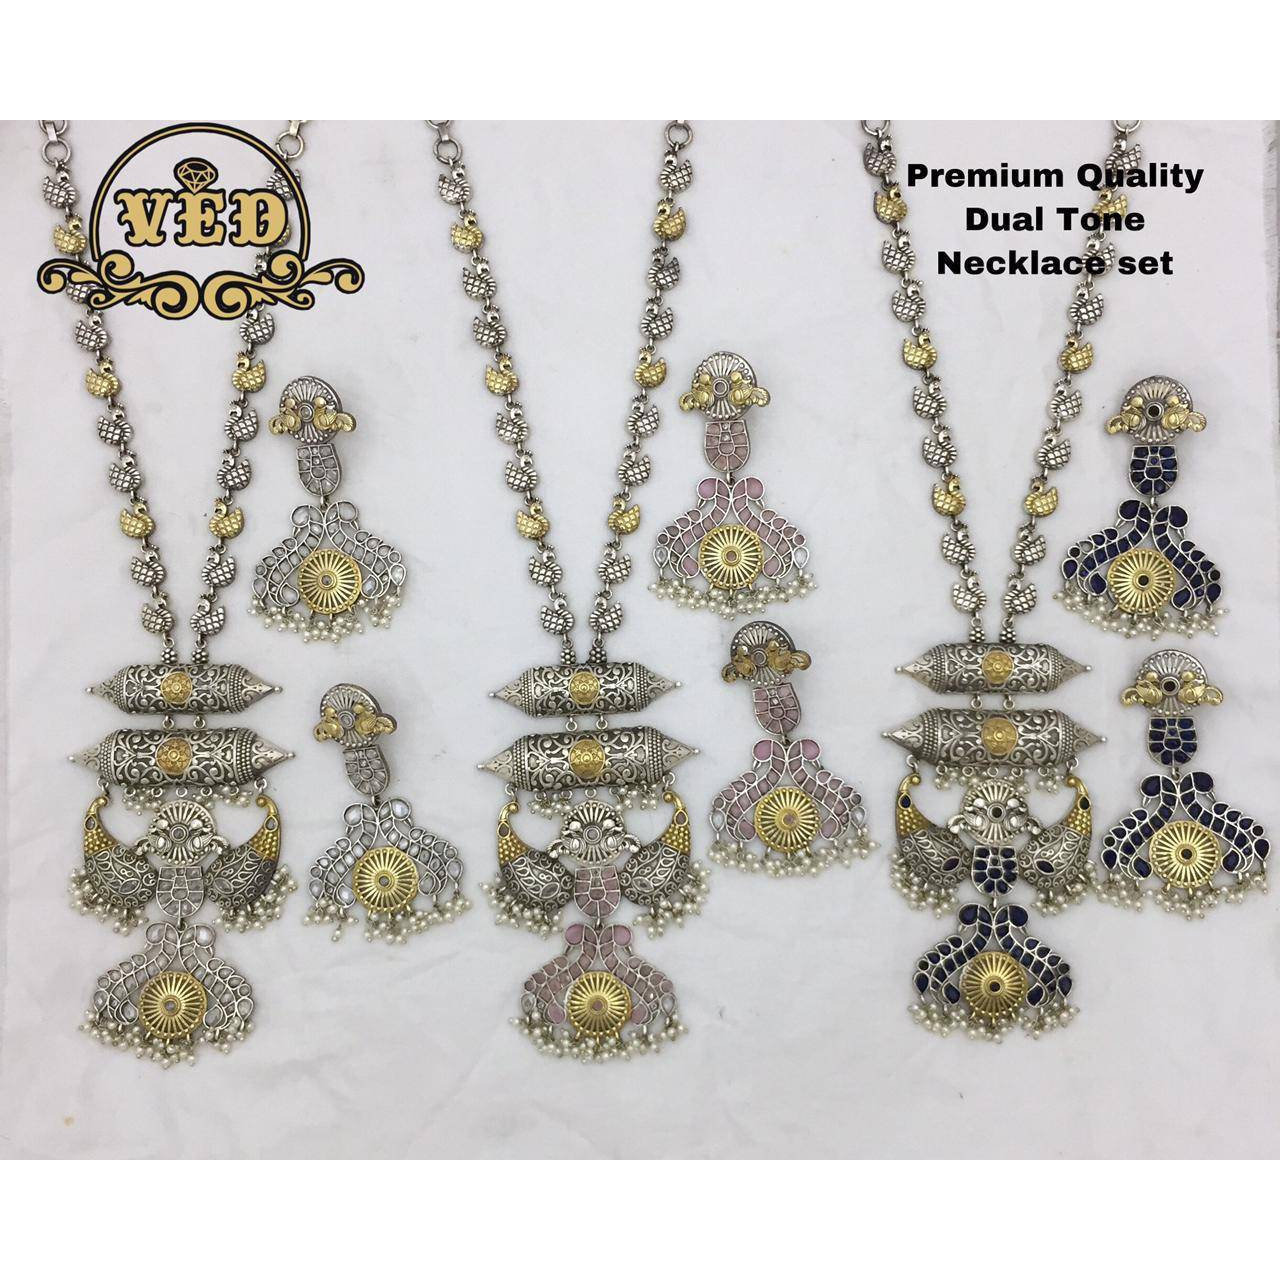 Dual tone necklace set,  Temple Jewelry, Long Necklace Set, Ethnic Jewelry, stone jewellery Gift For Her, Indian Jewelry Necklace Set,